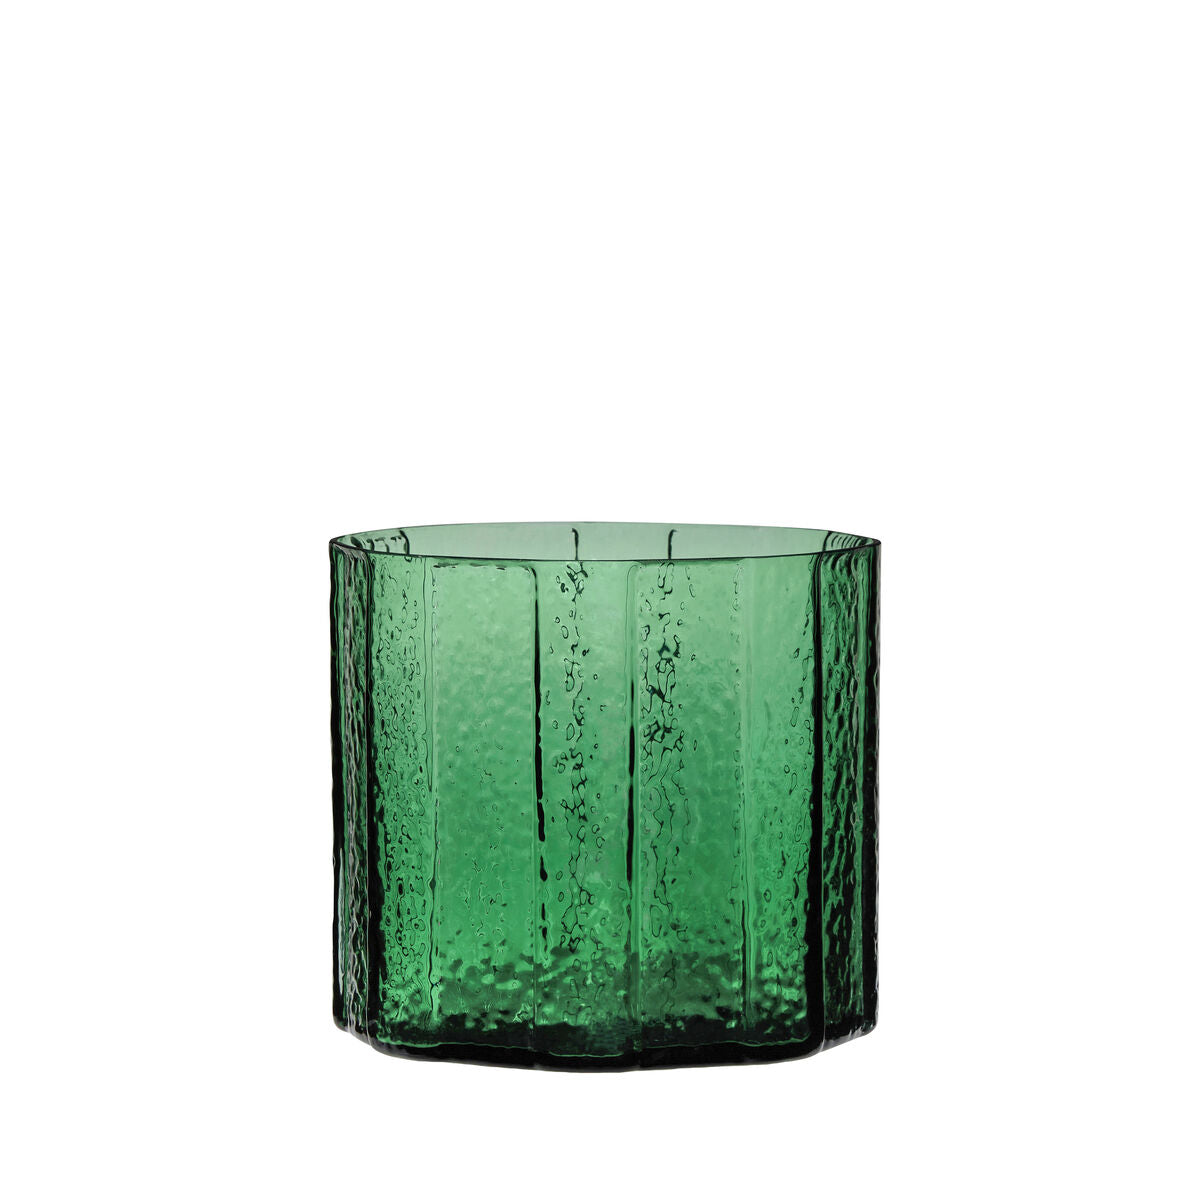 The Every Space deep green Emerald Vase for flowers, in textured glass by Hübsch